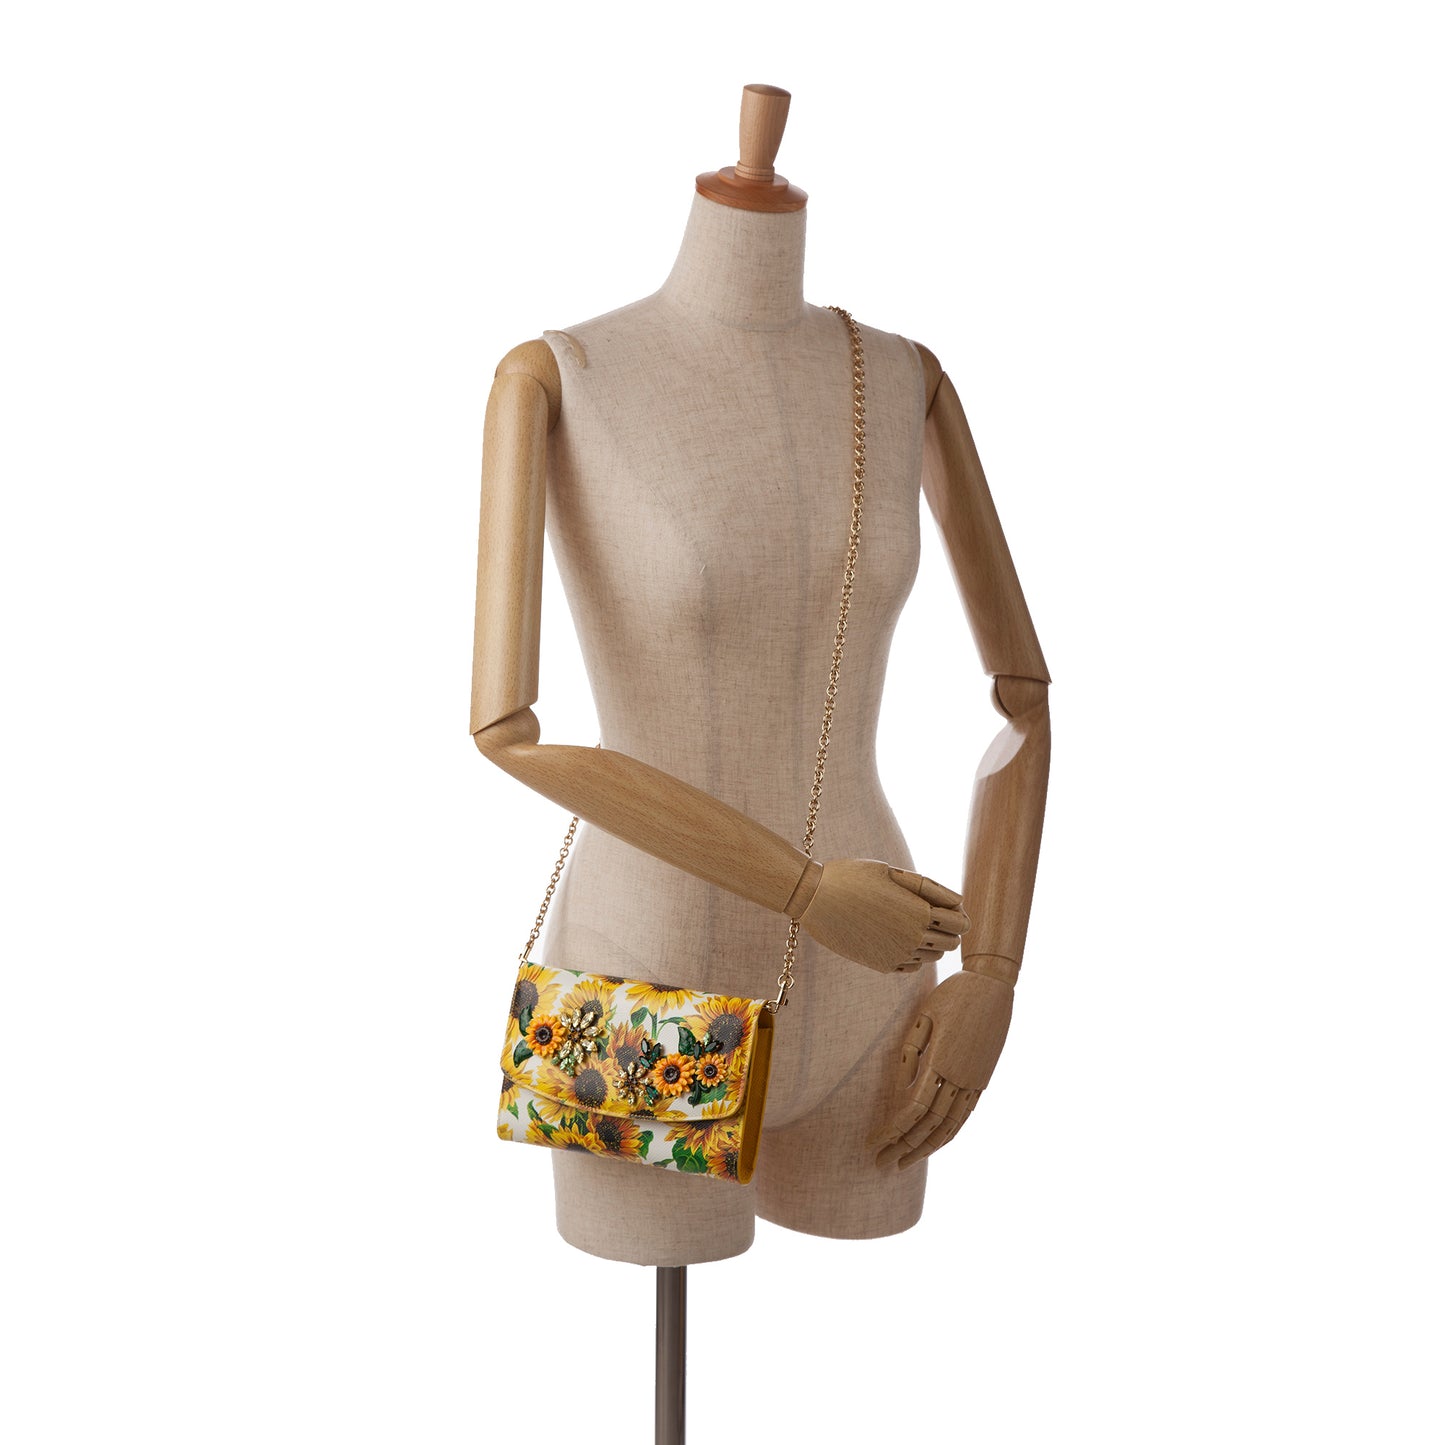 Sunflower Printed Leather Wallet on Chain Yellow - Gaby Paris